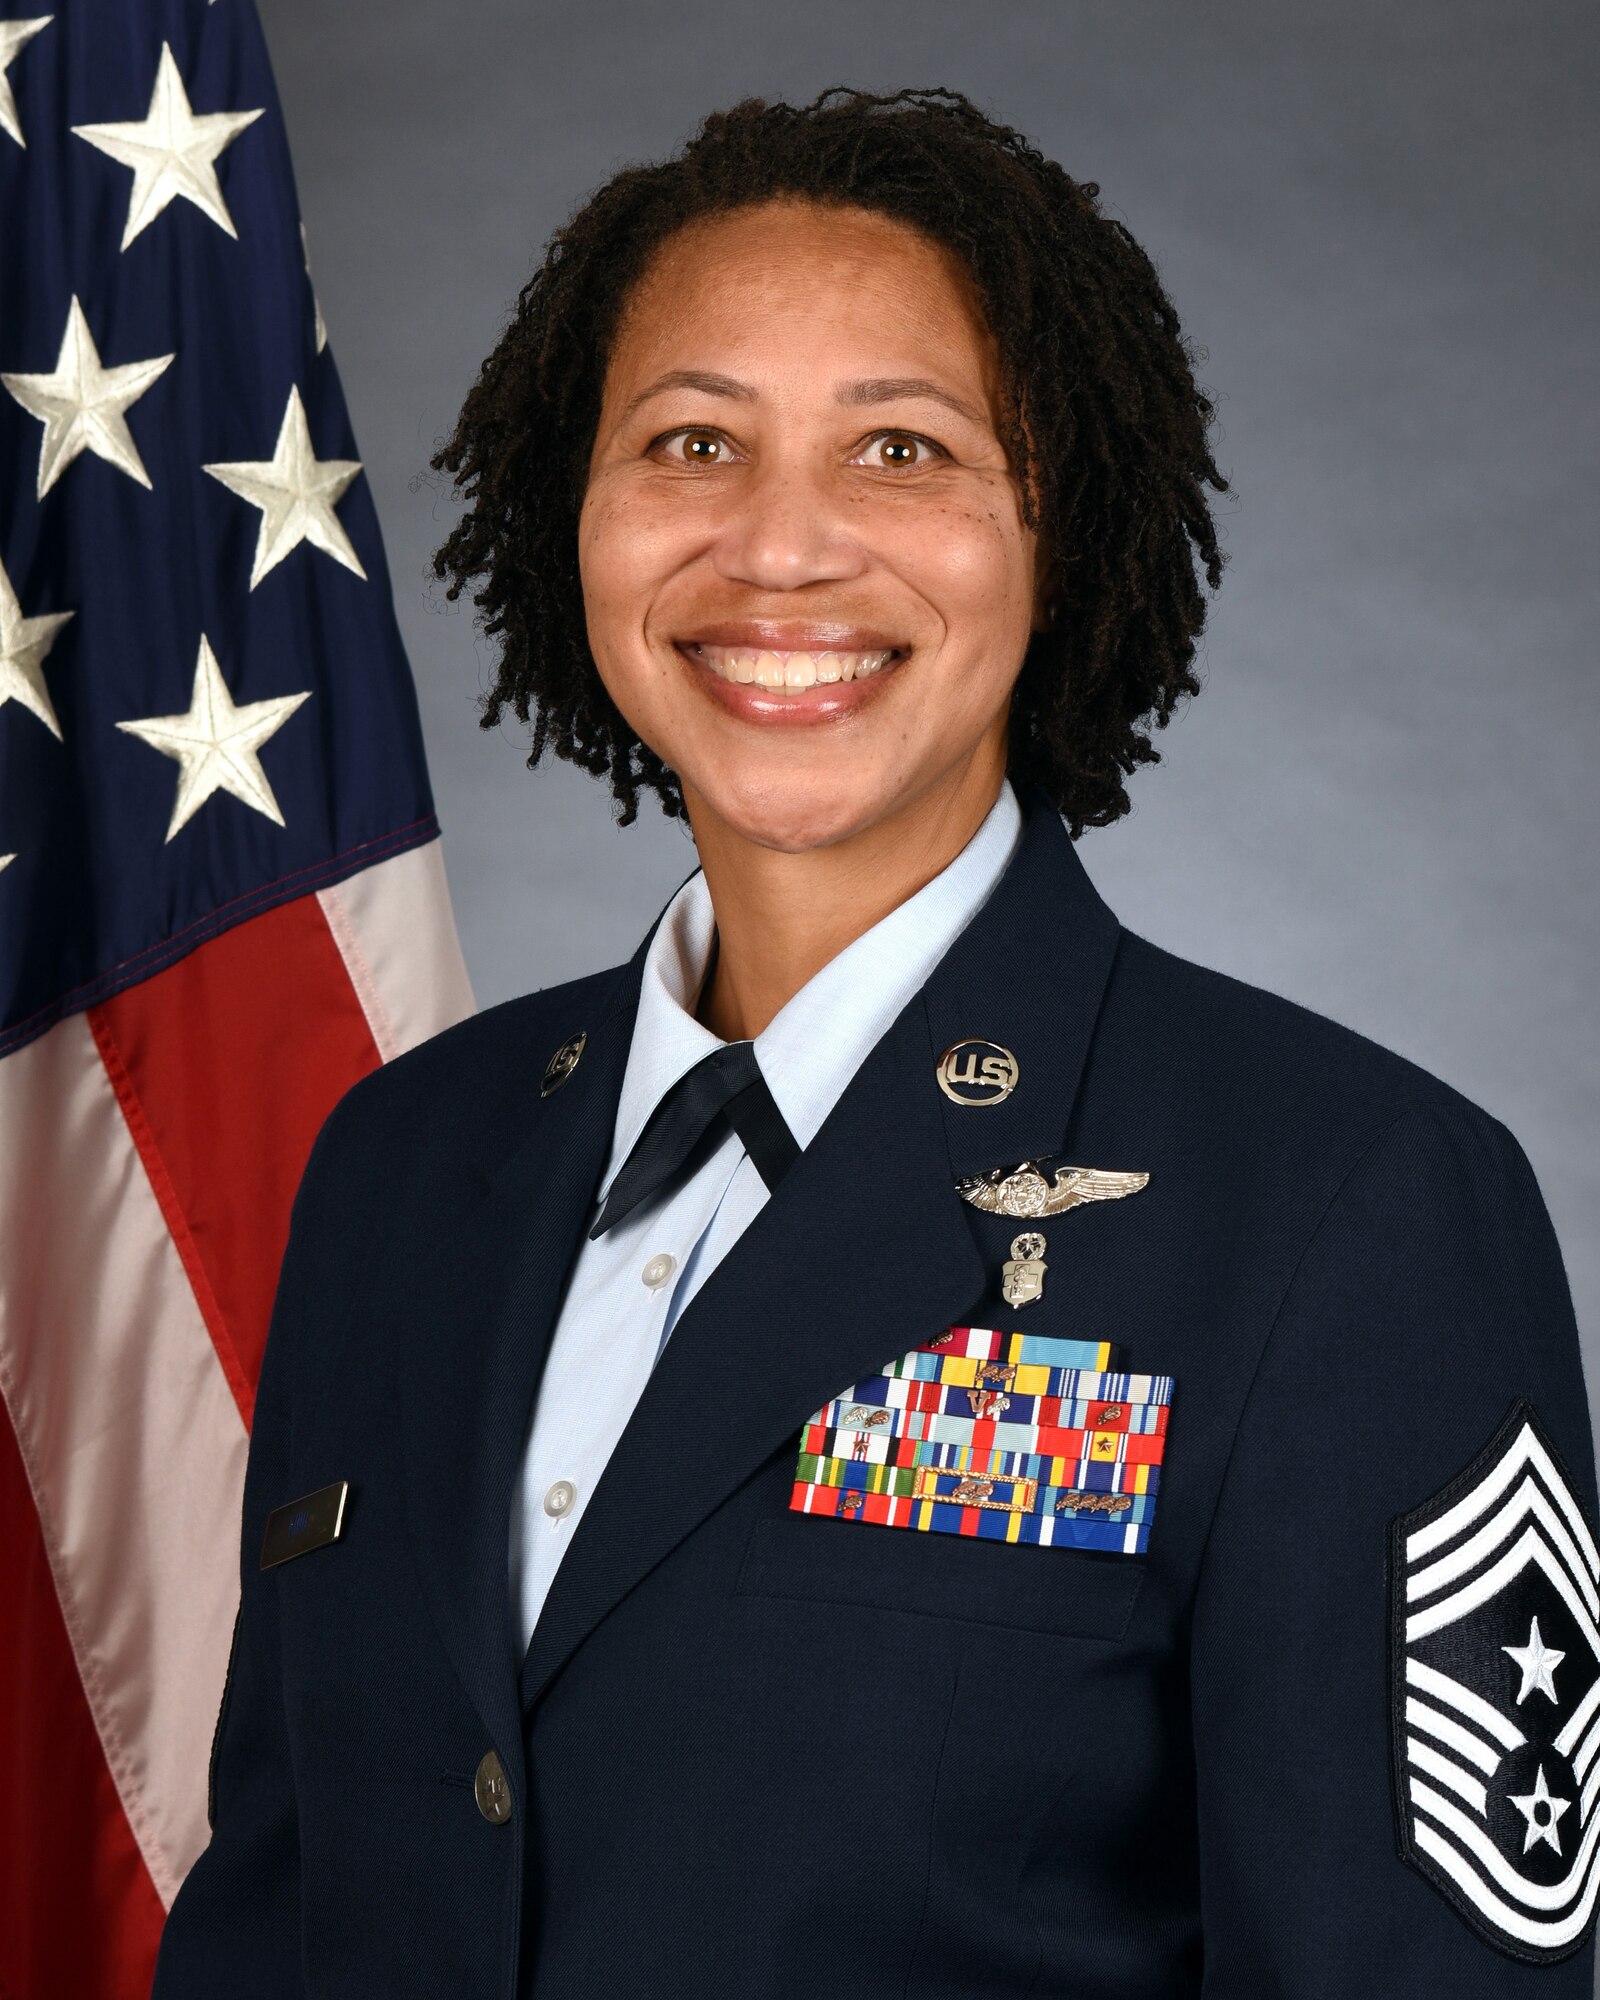 Chief Master Sergeant Sheronne L. King is the
Command Chief Master Sergeant of the 15th
Wing, Joint Base Pearl Harbor-Hickam, Hawaii.